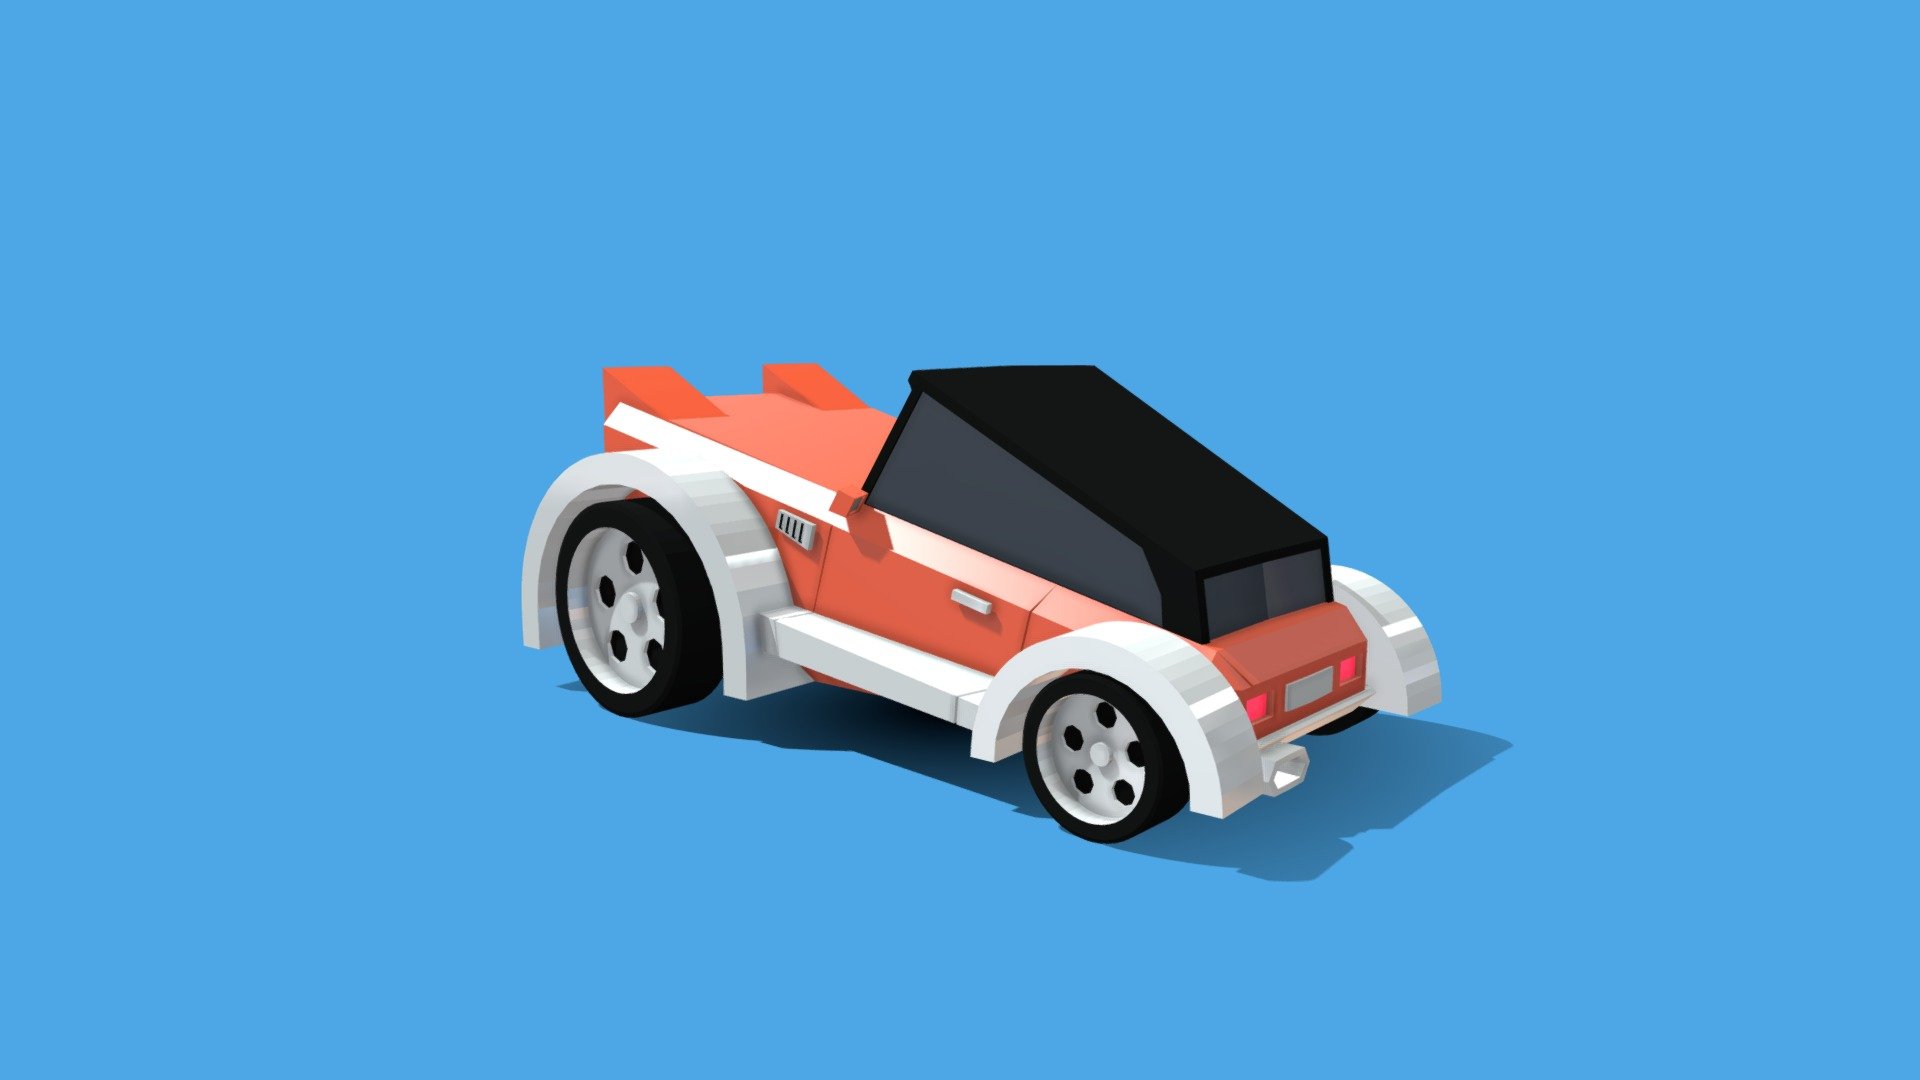 This car is the first from my Broken Proportions project. She combines aggressiveness and playfulness well. Ideal for games where stylized cars are needed to give an unforgettable gameplay experience 3d model